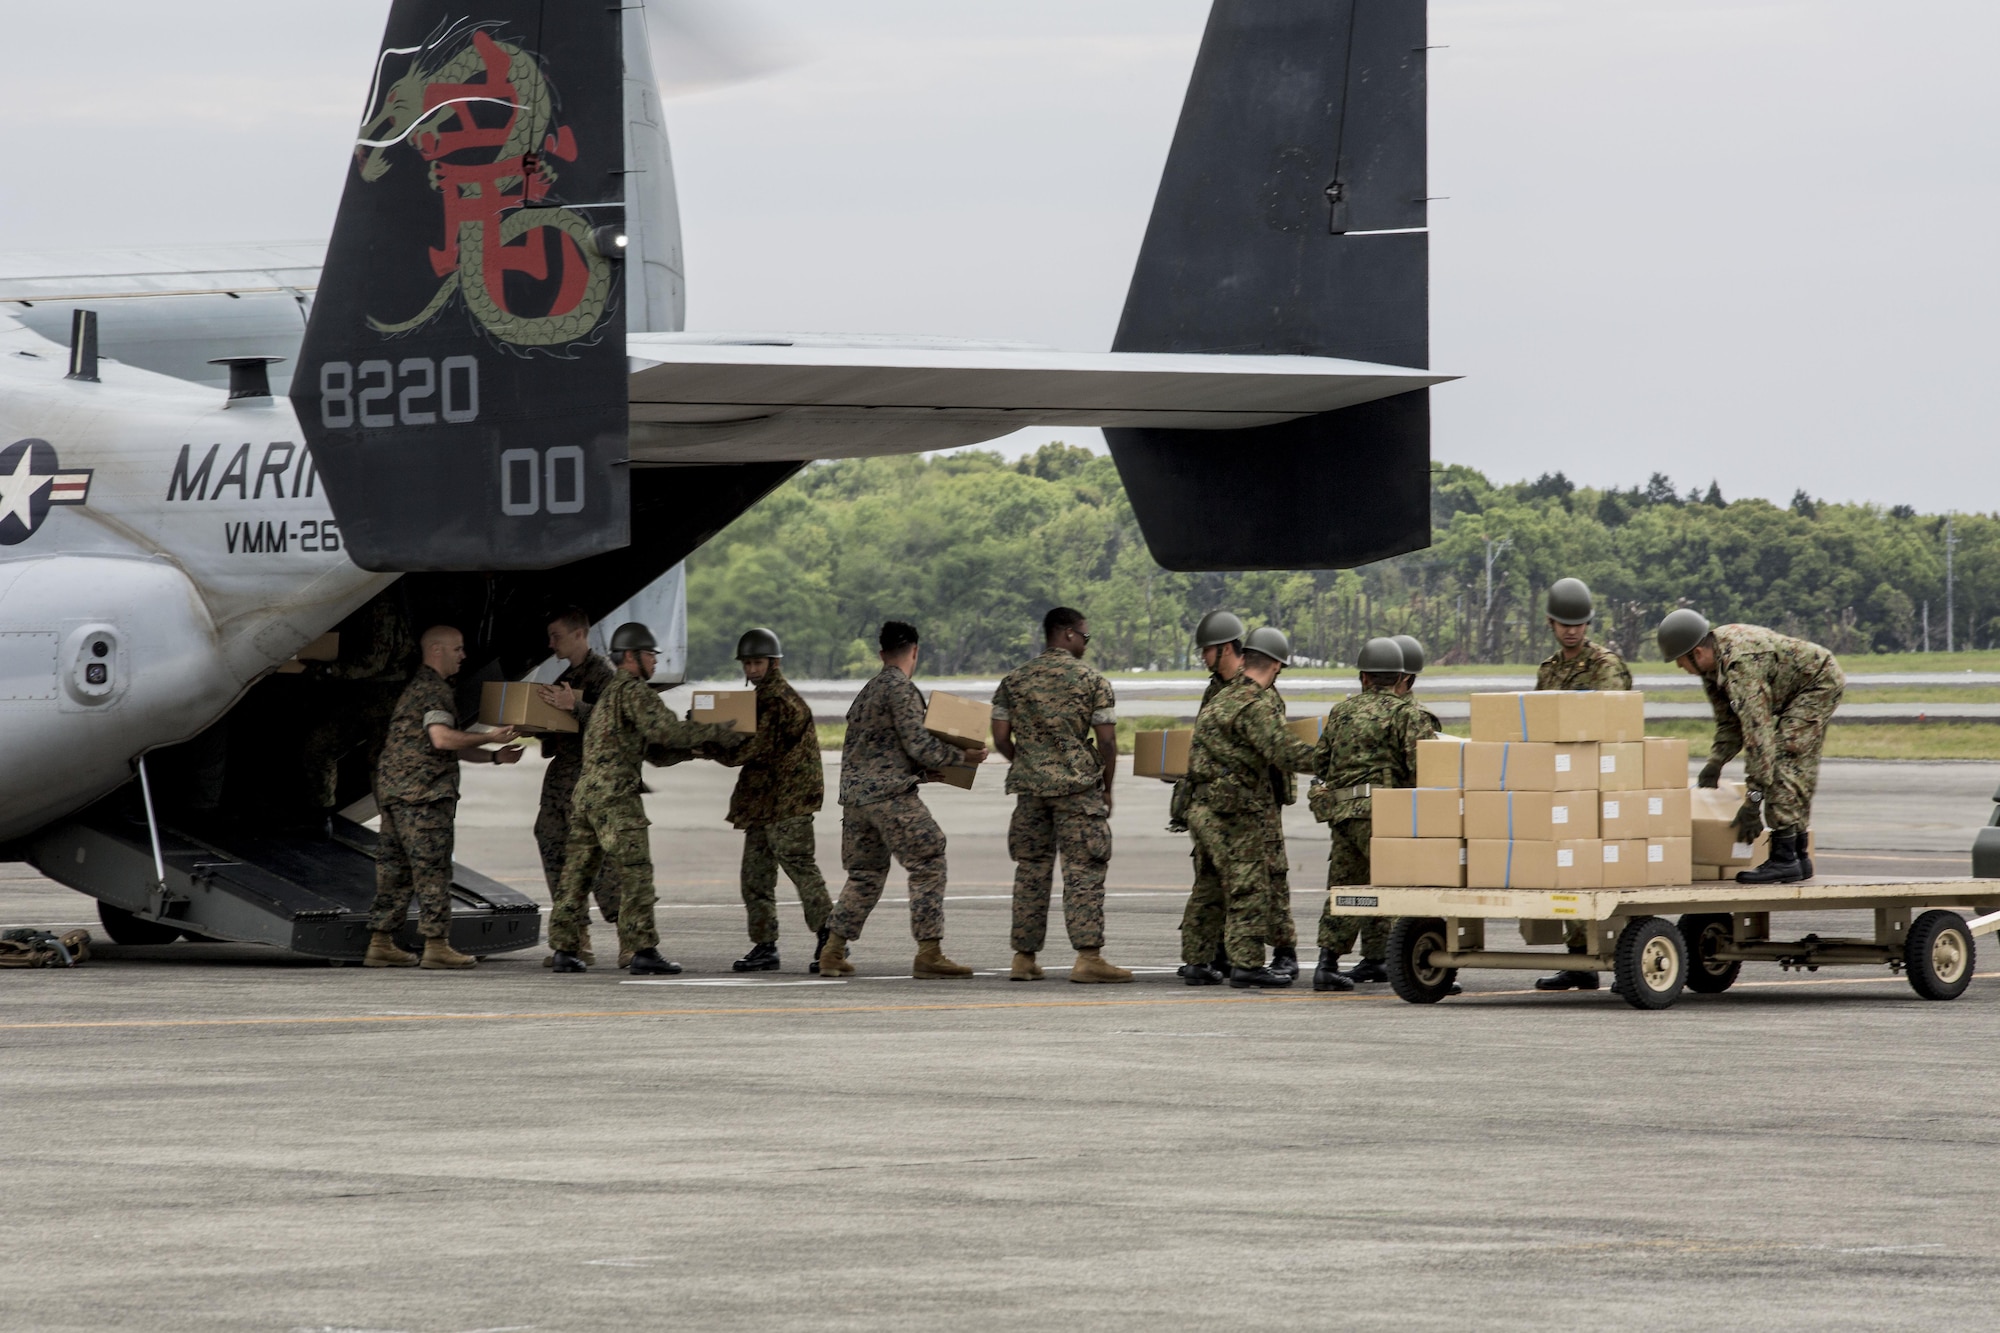 U.S. Marines and Japanese soldiers load boxes of humanitarian aid into an MV-22 Osprey aircraft at Japanese Camp Takayubaru, Japan, April 18, 2016, to support earthquake relief efforts near Kumamoto. (Marine Corps photo/Cpl. Nathan Wicks)